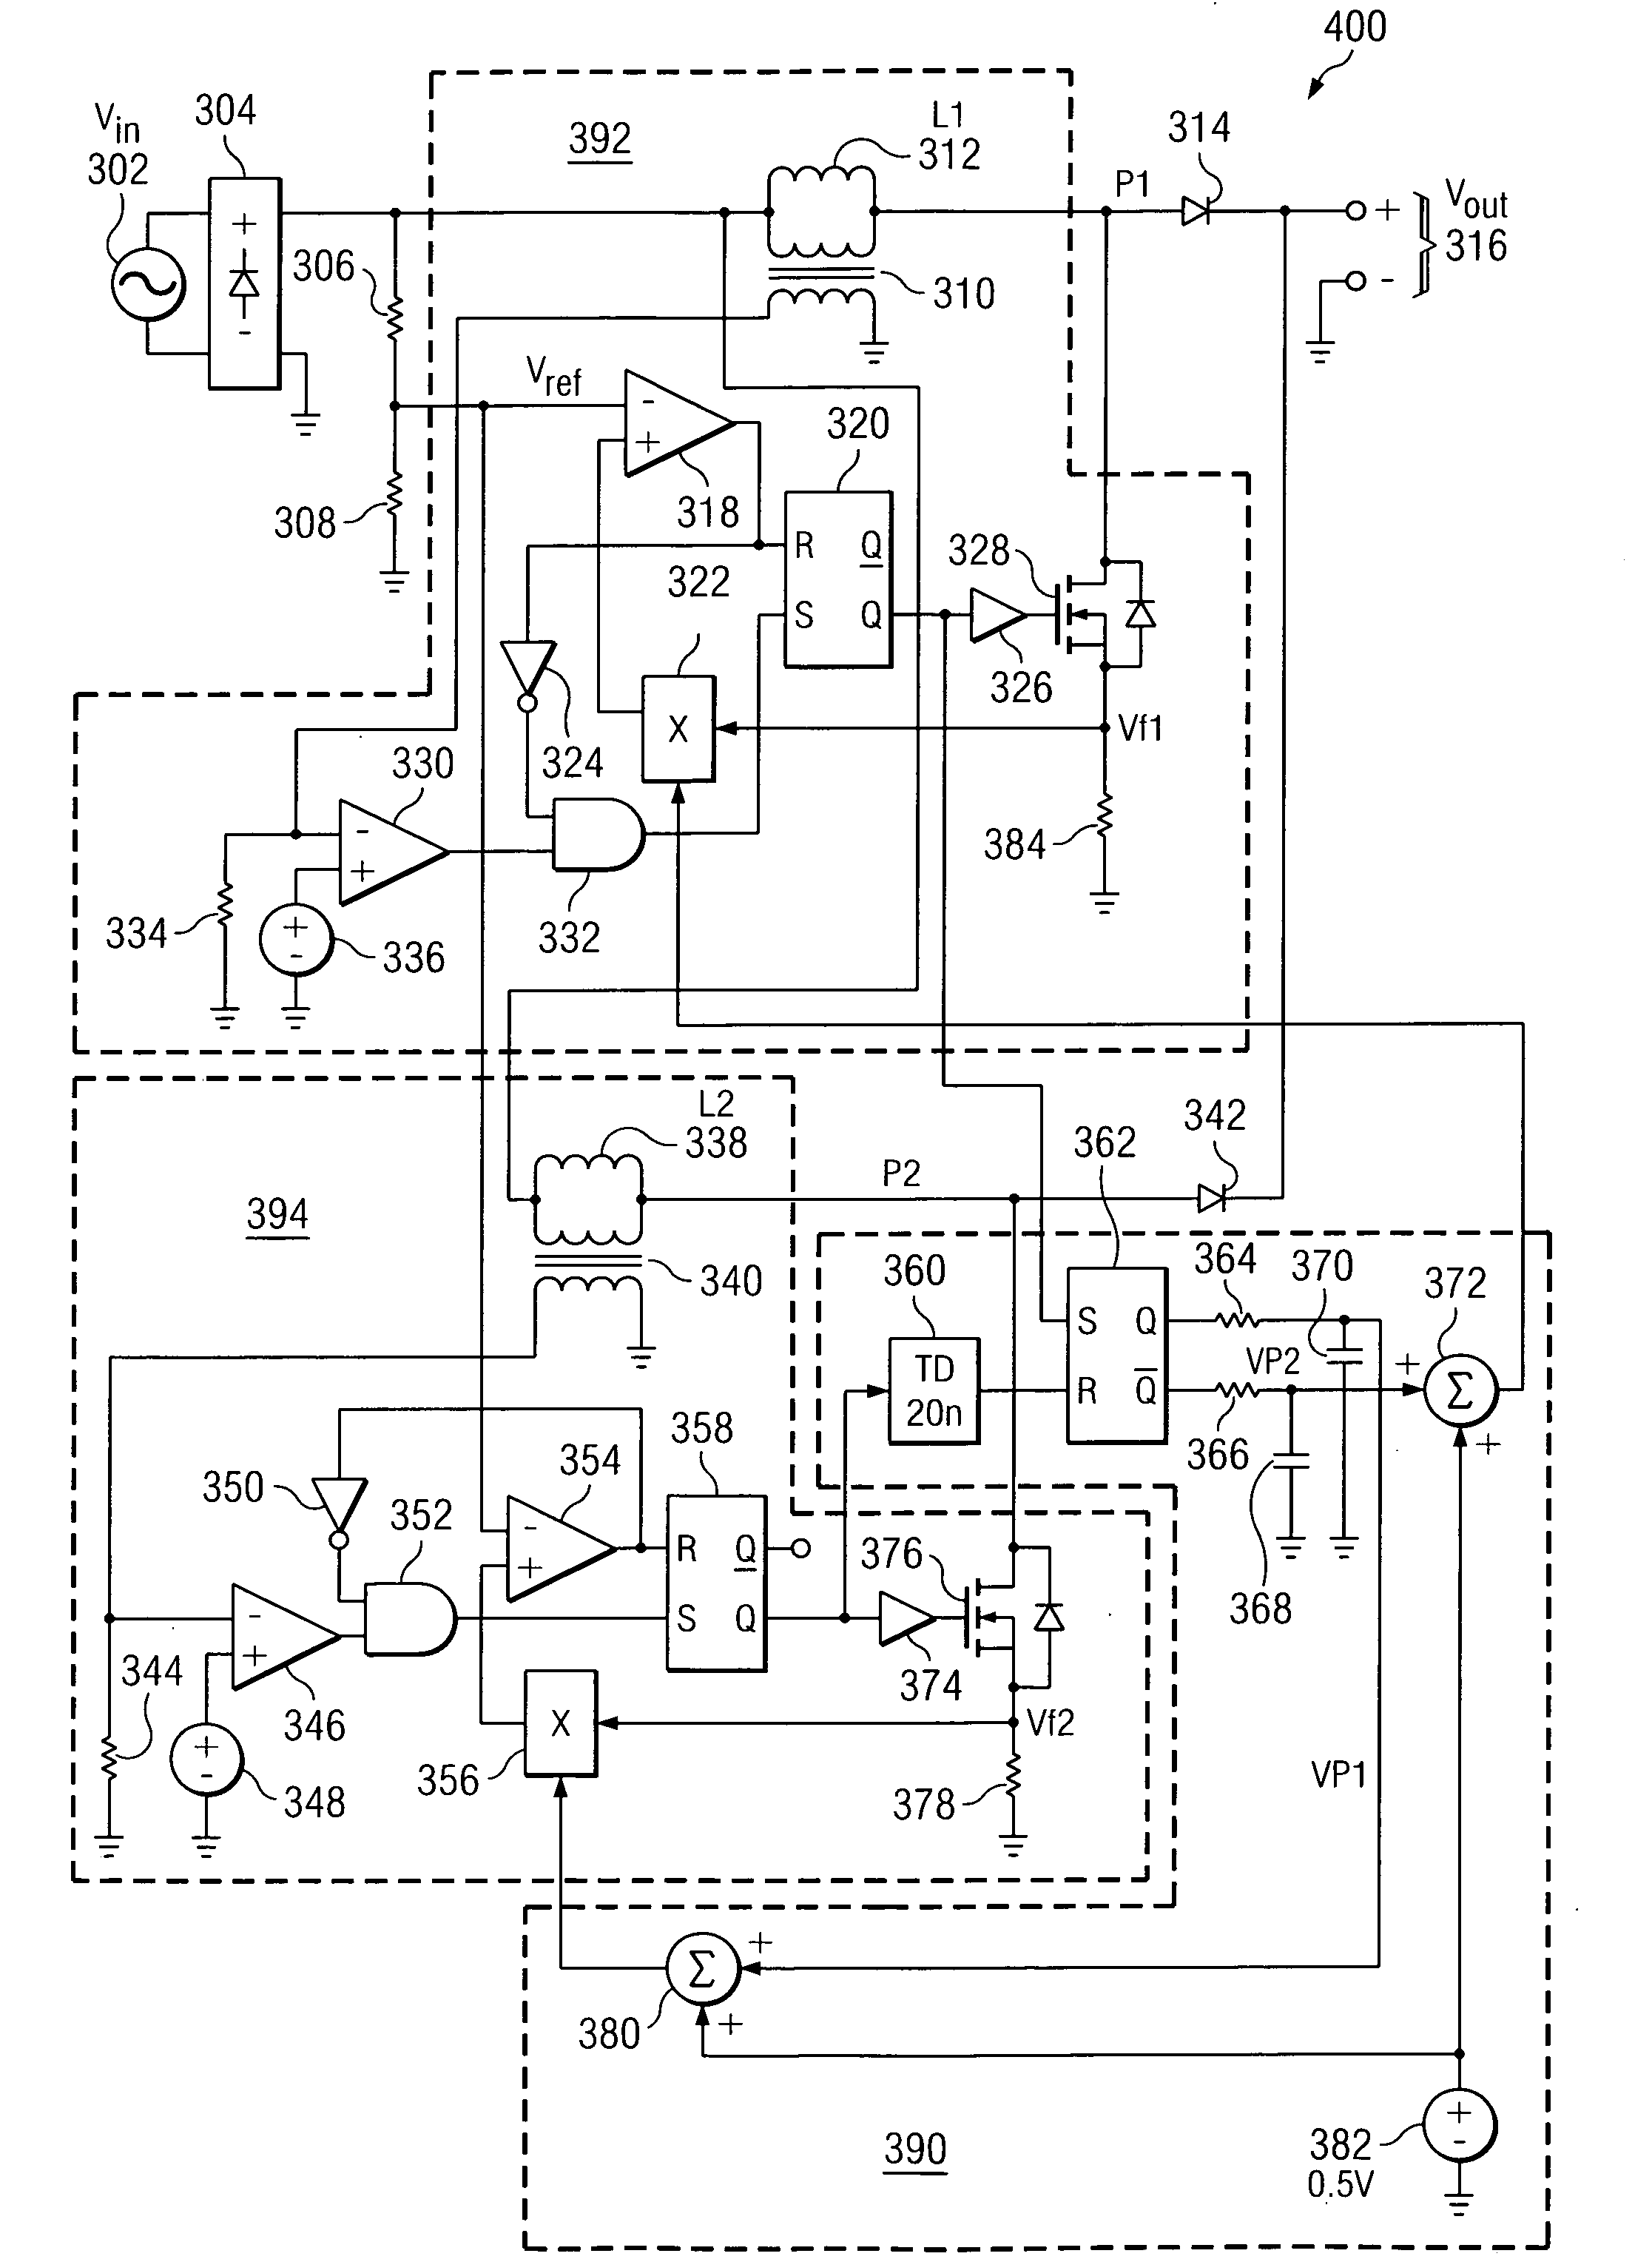 Method and apparatus for power converters having phases spaced at desired phase angles